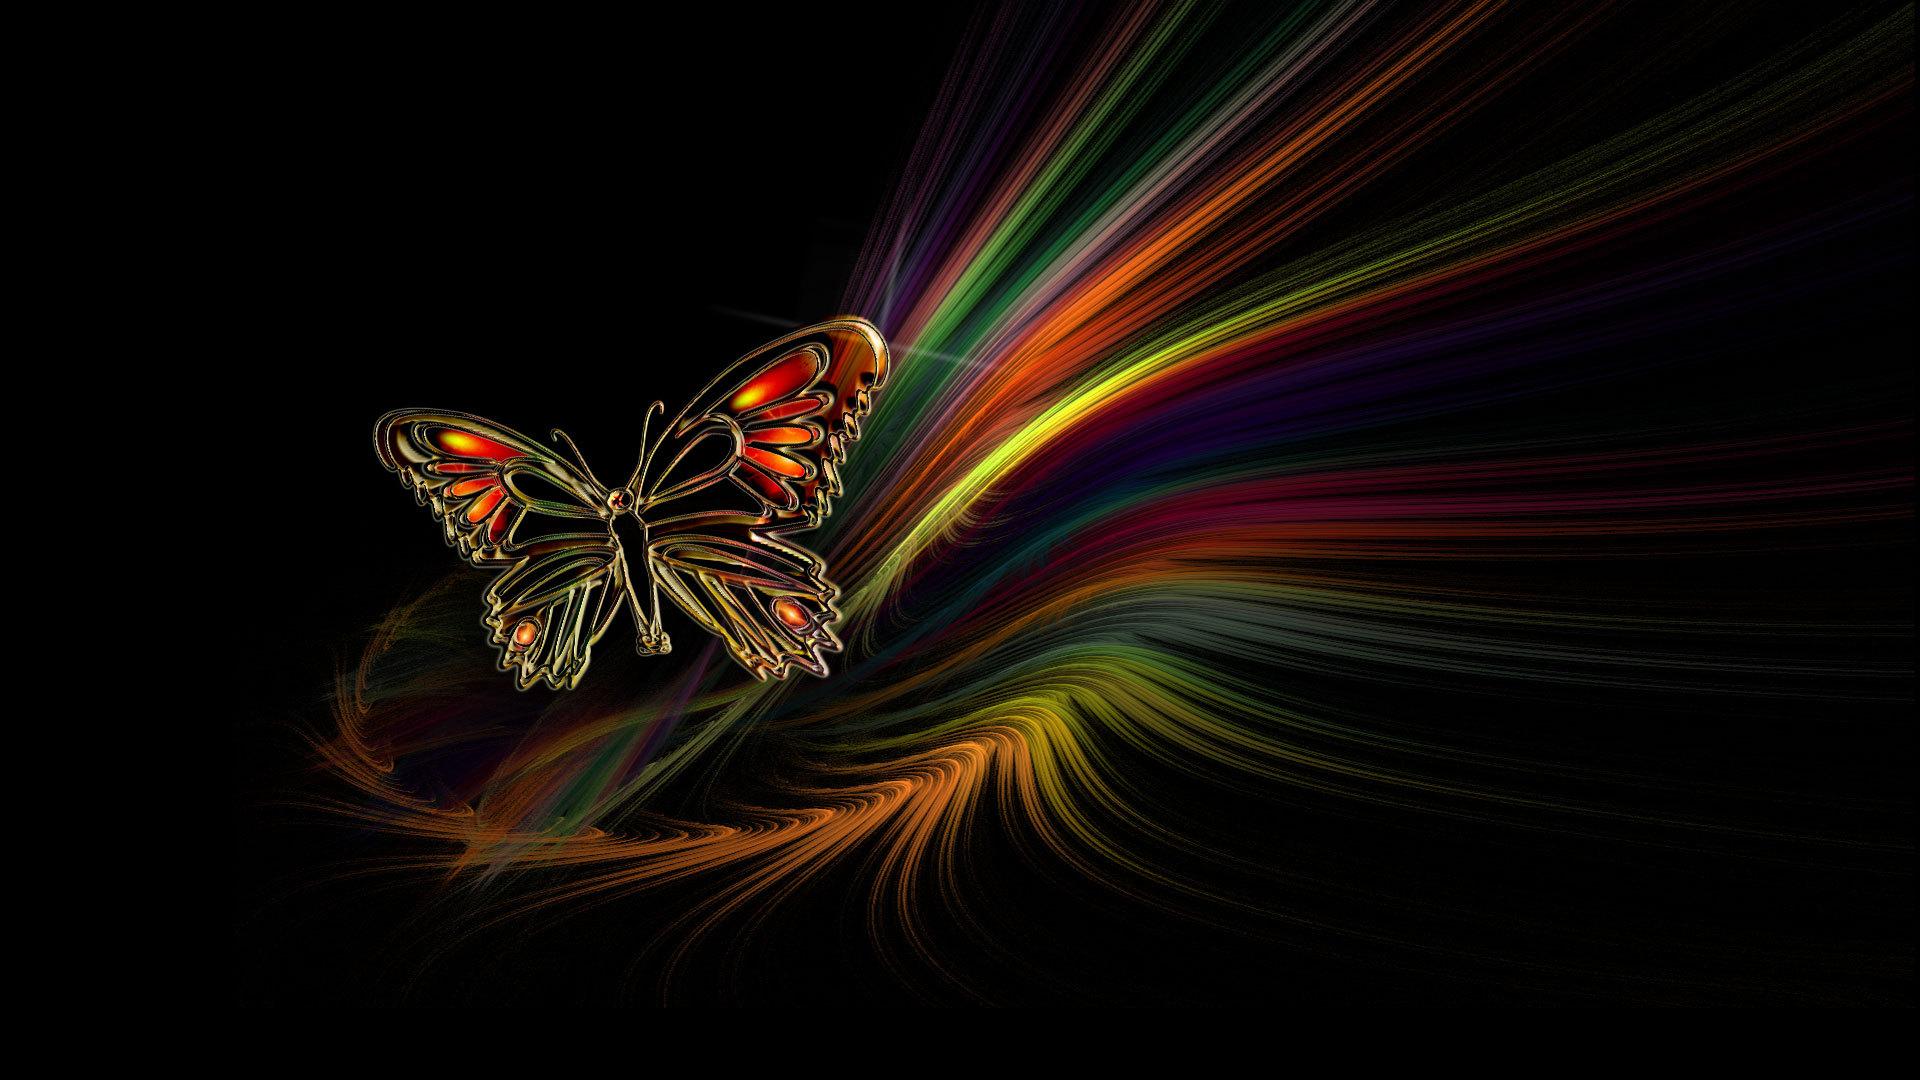 Butterfly Abstract HD Wallpaper by Wallsev.com